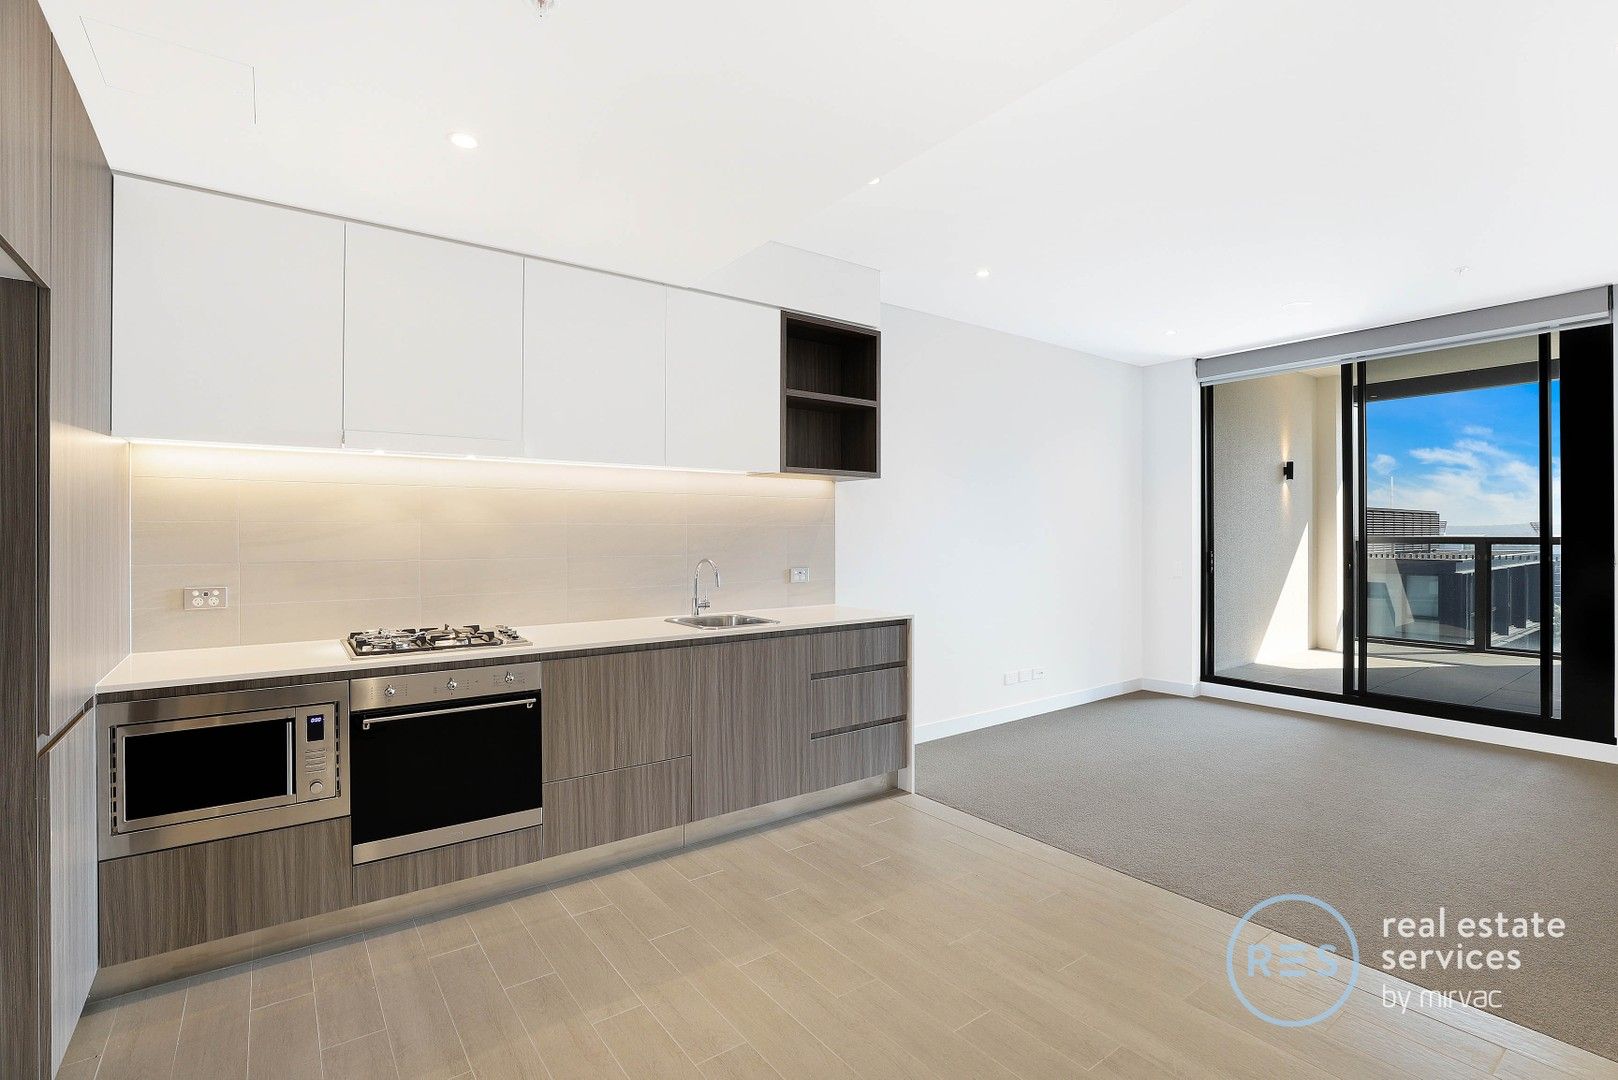 1 bedrooms Apartment / Unit / Flat in 21209/2 Figtree SYDNEY OLYMPIC PARK NSW, 2127